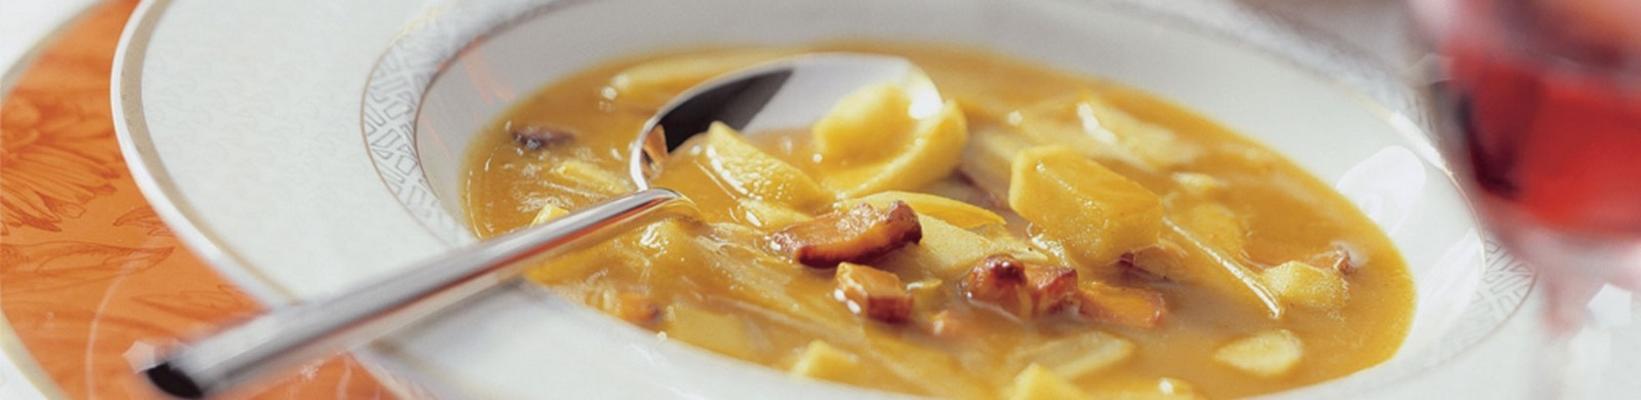 curry-chicory soup with bacon and pieces of apple